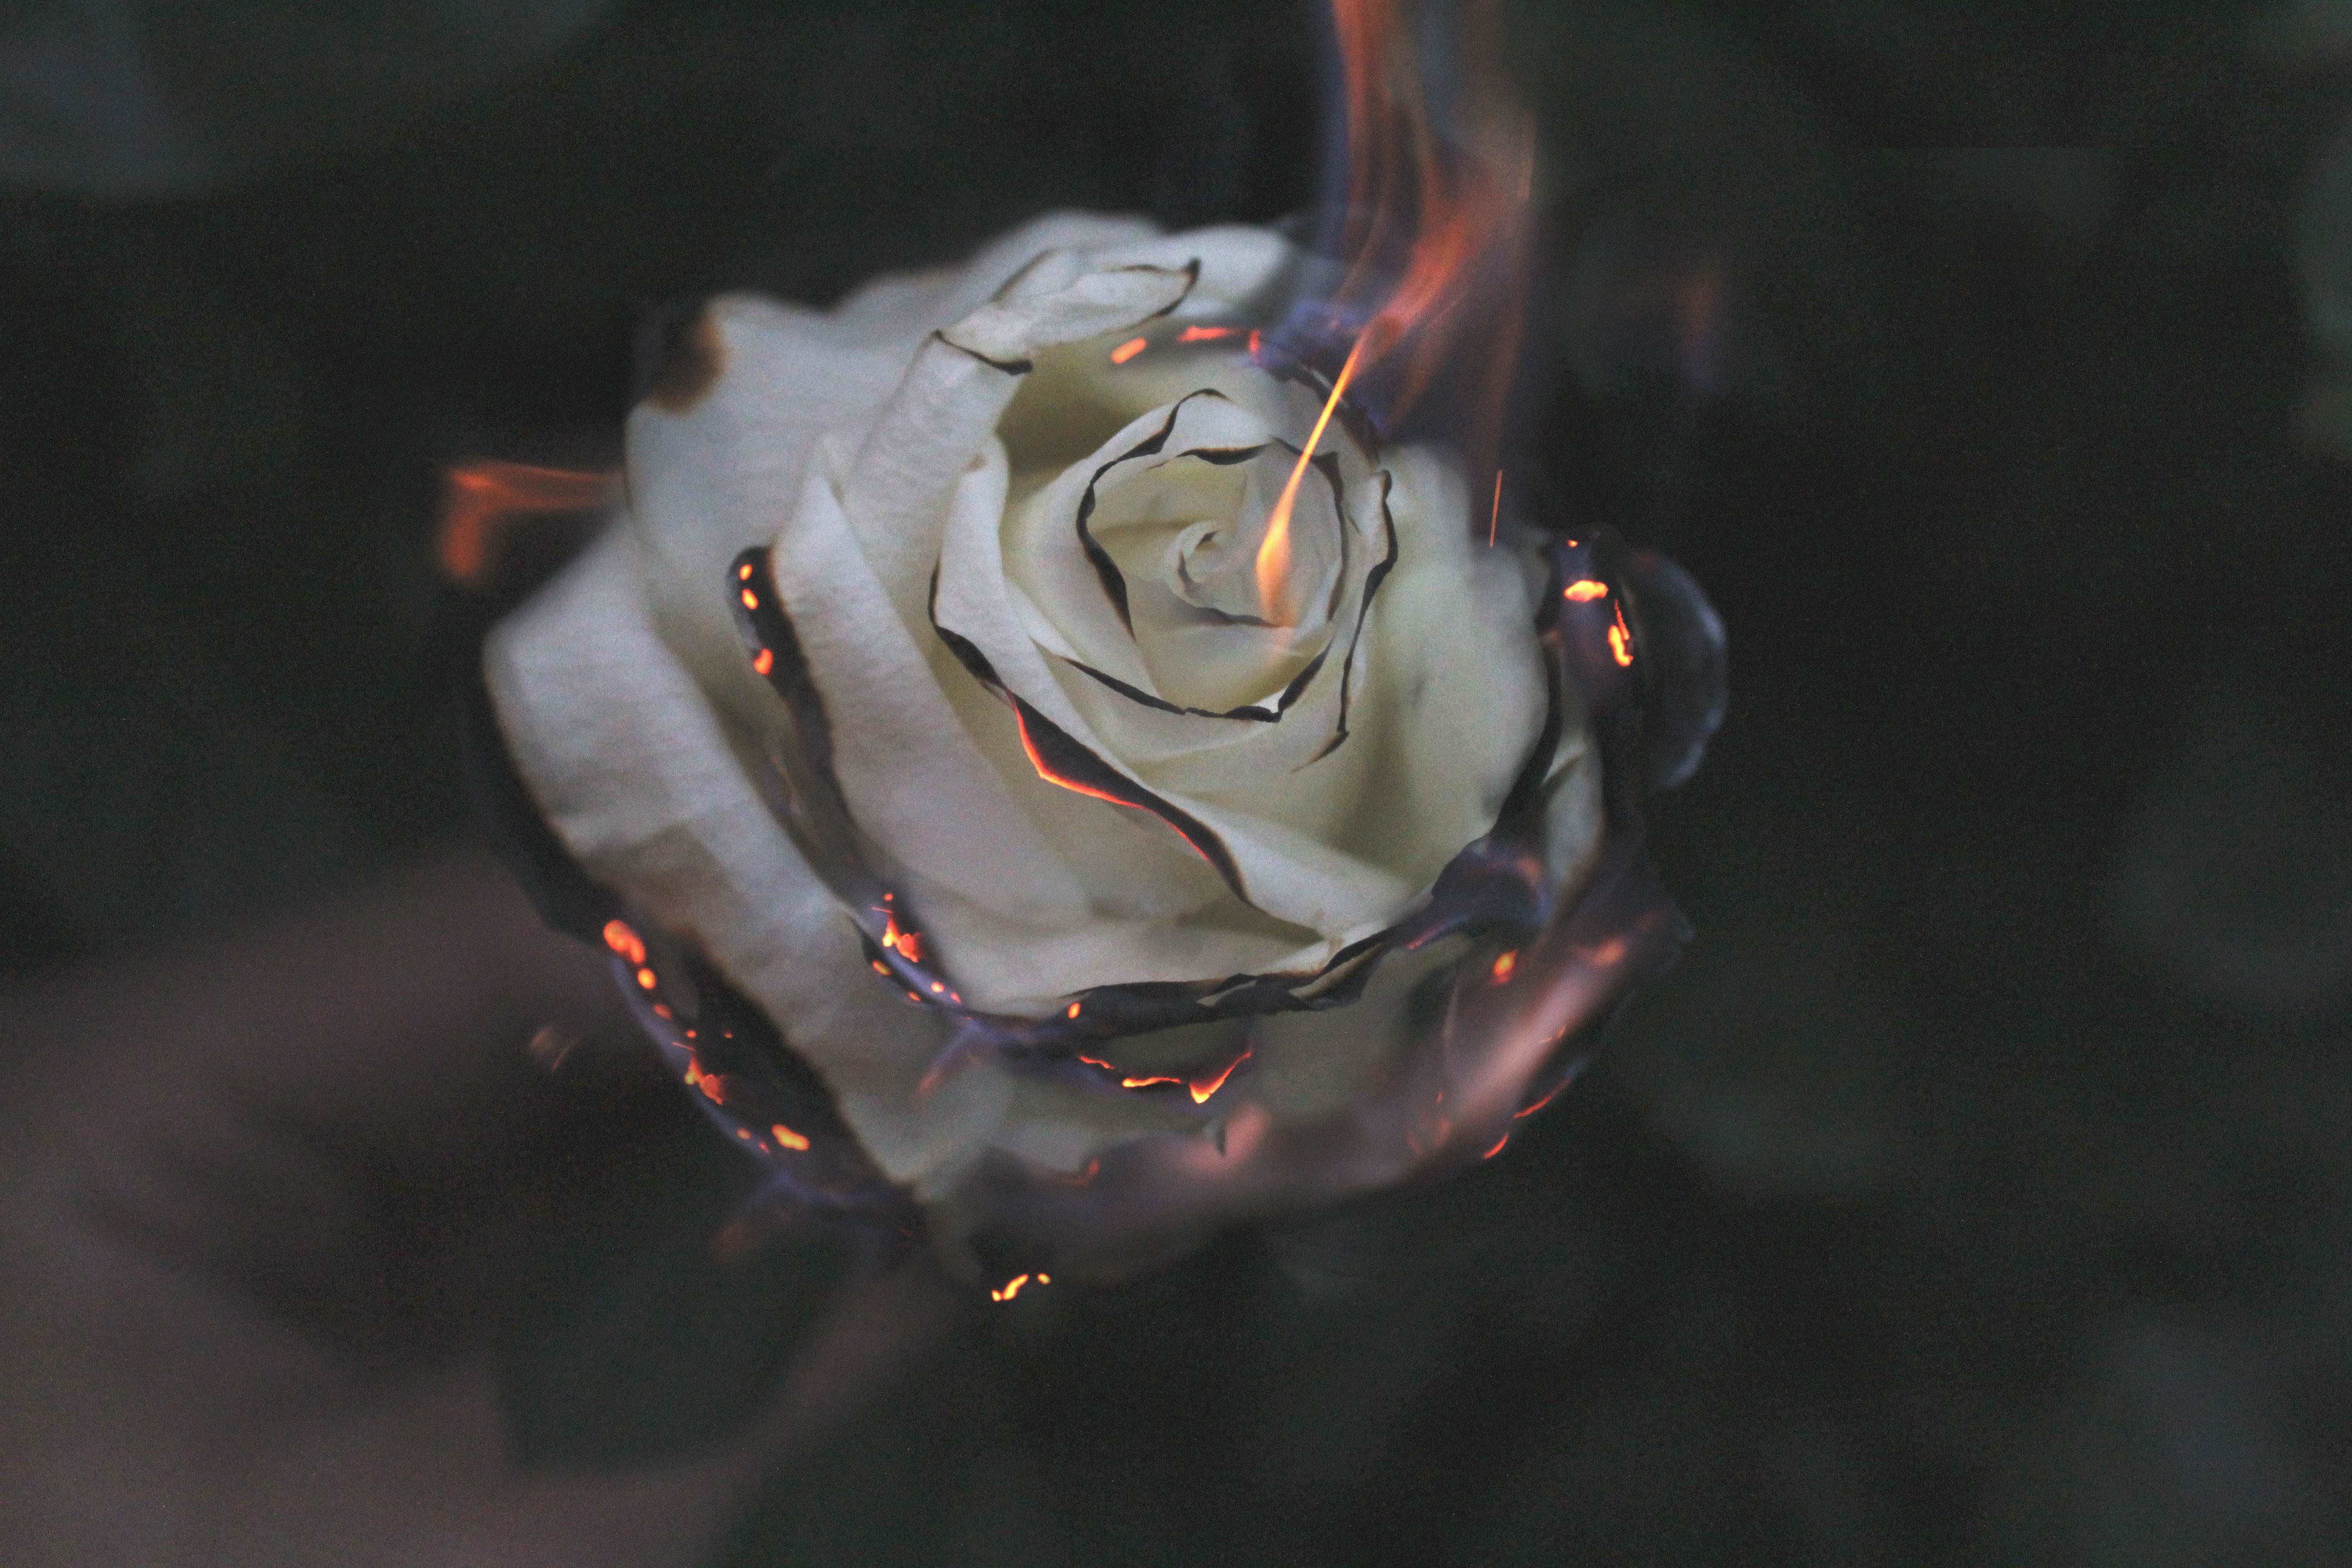 Rose On Fire Wallpapers - Wallpaper Cave